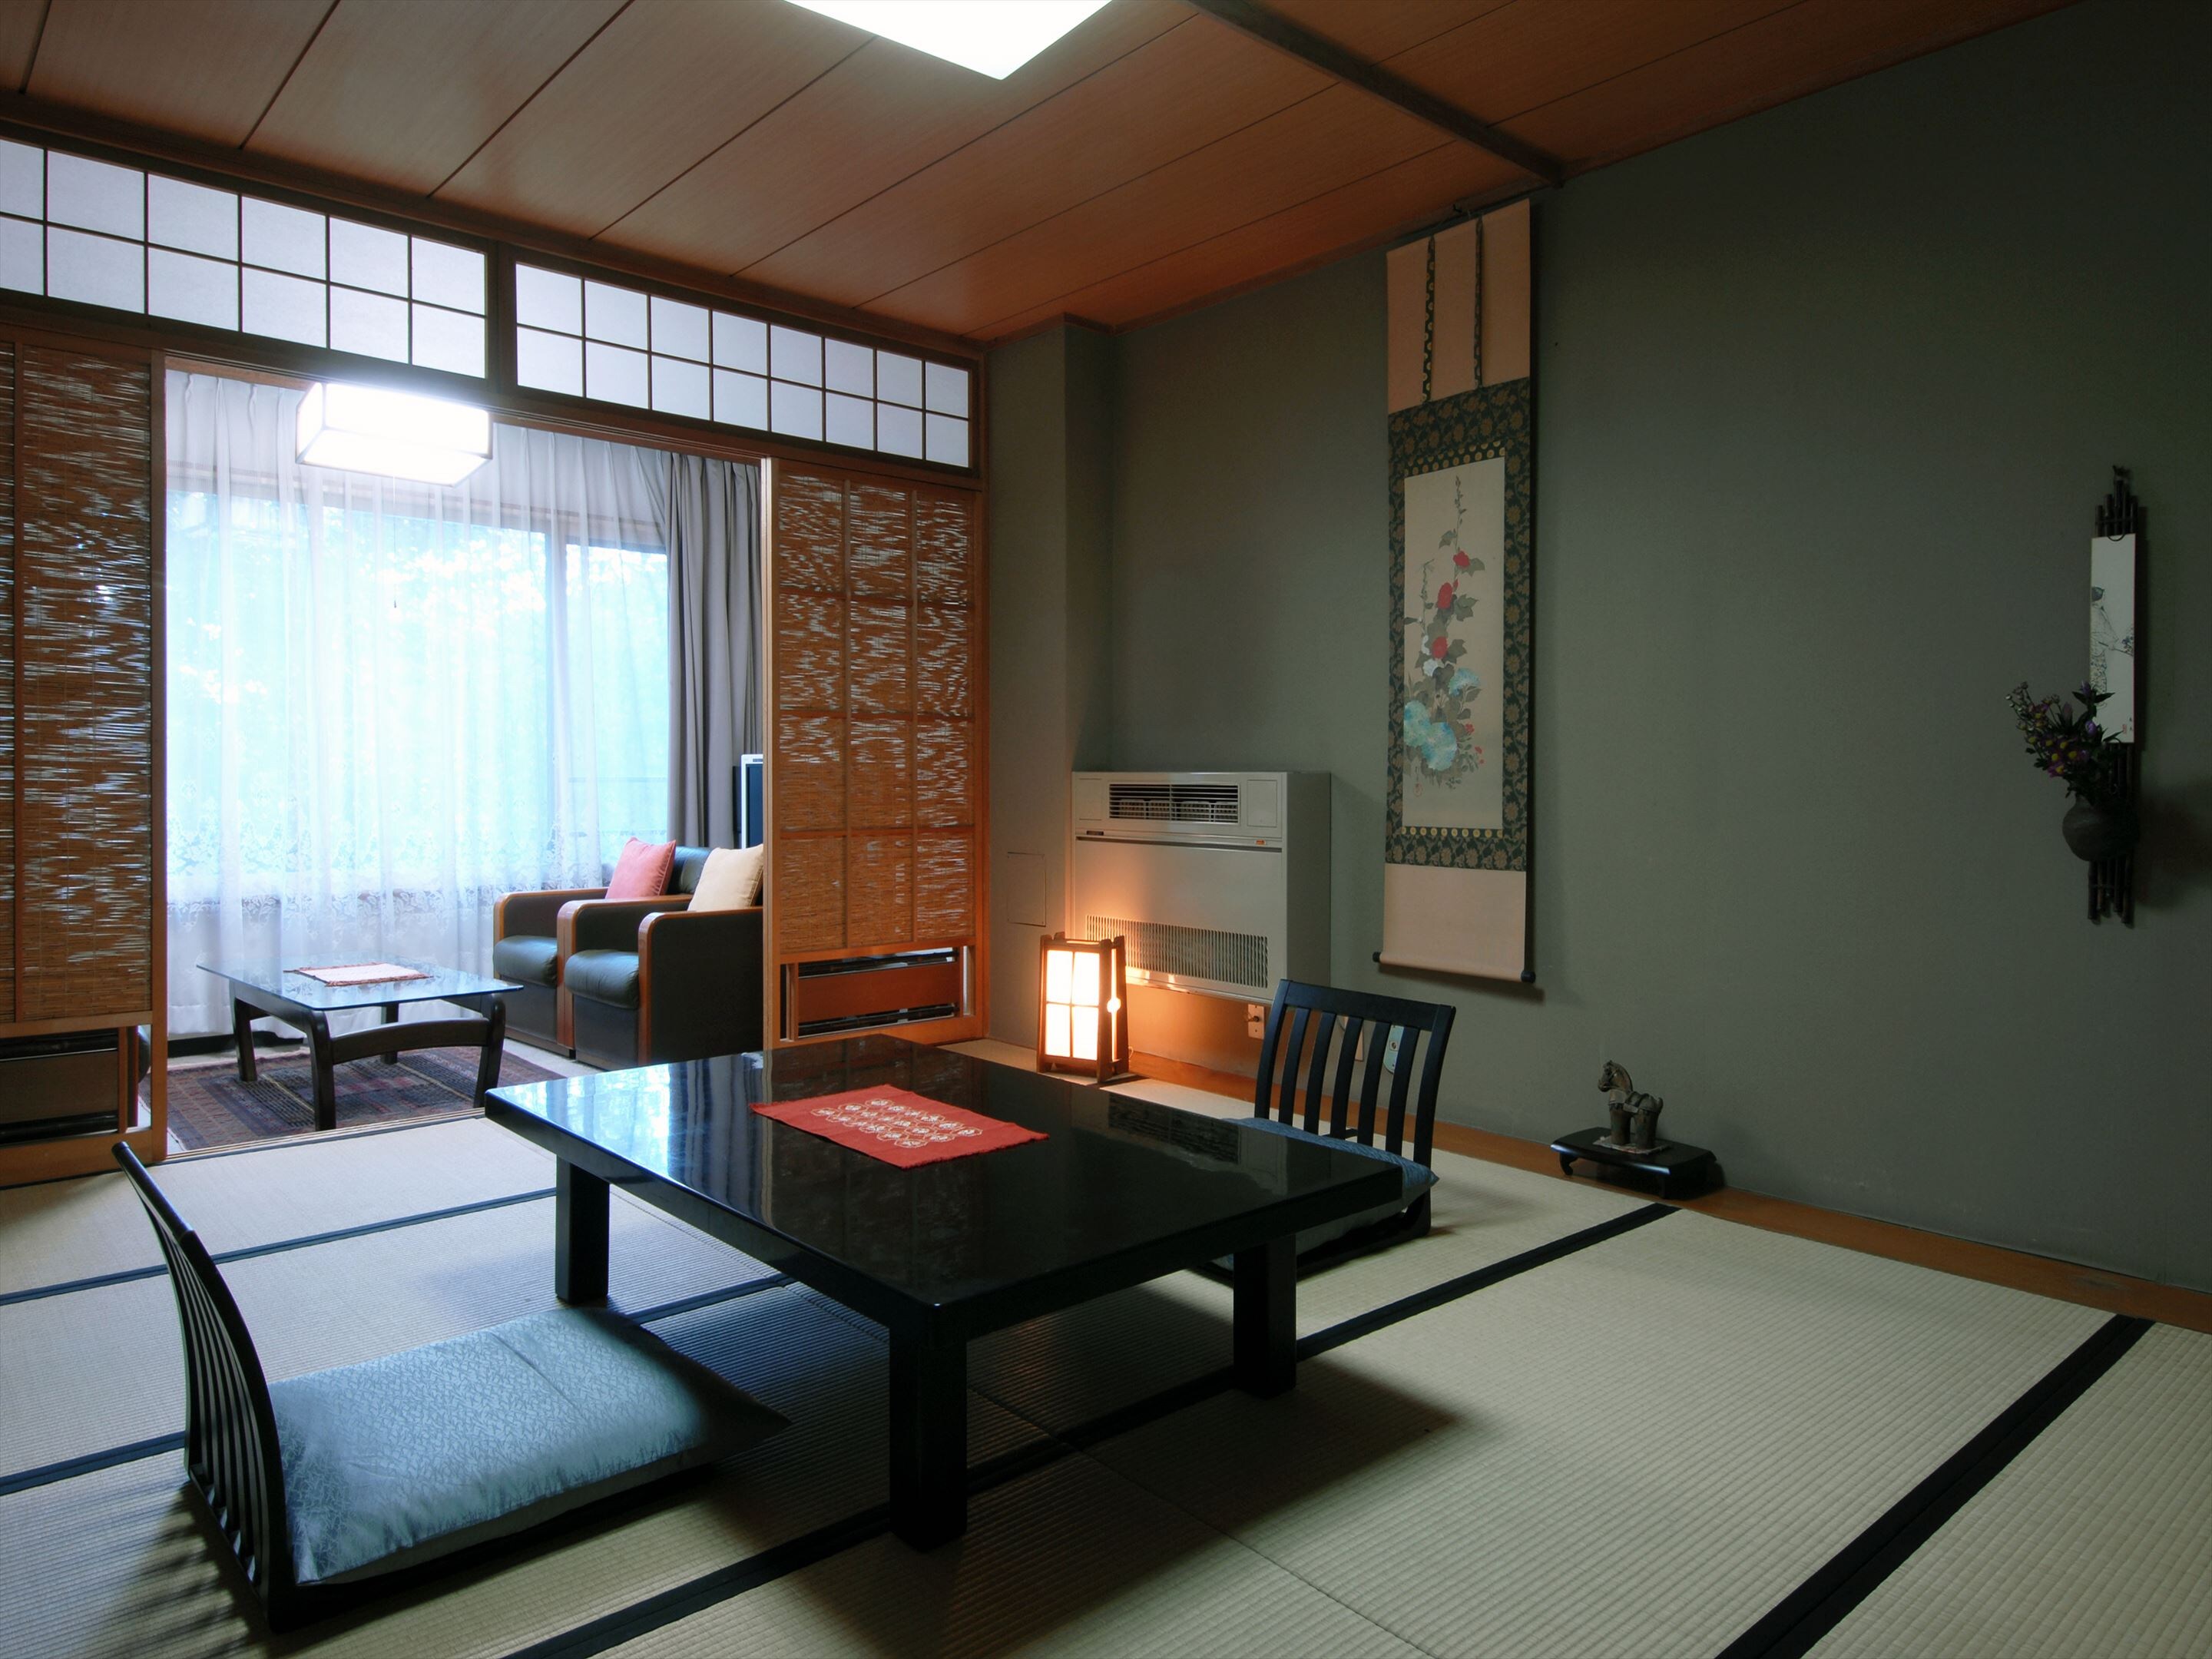 The 14 tatami Japanese-style room is ideal for those who want to relax together!